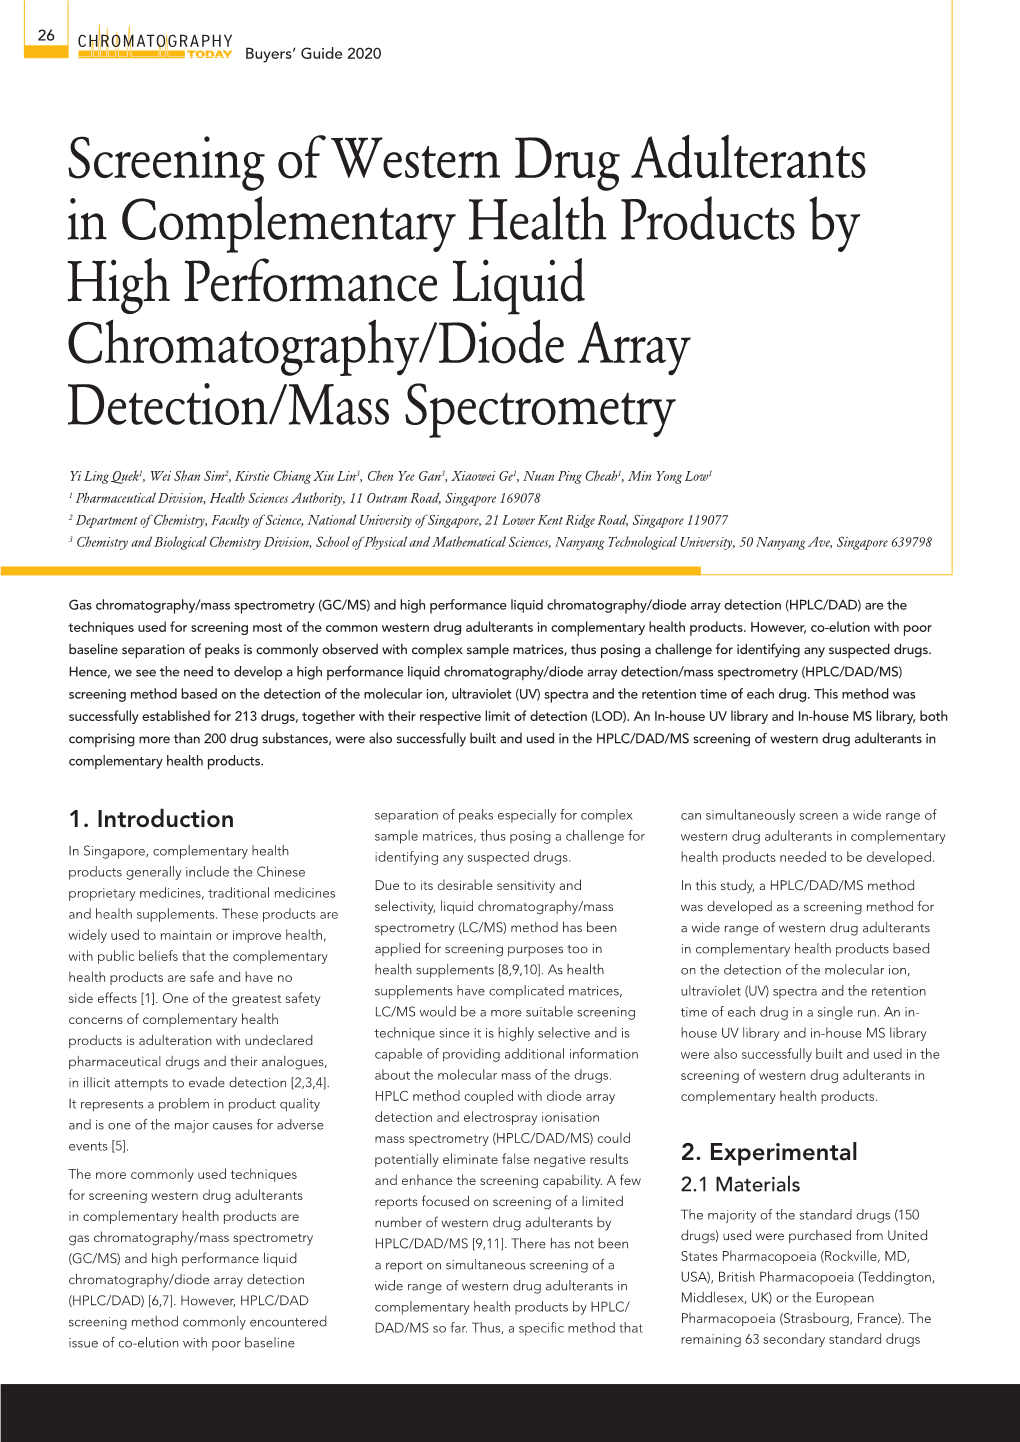 Screening of Western Drug Adulterants in Complementary Health Products by High Performance Liquid Chromatography/Diode Array Detection/Mass Spectrometry